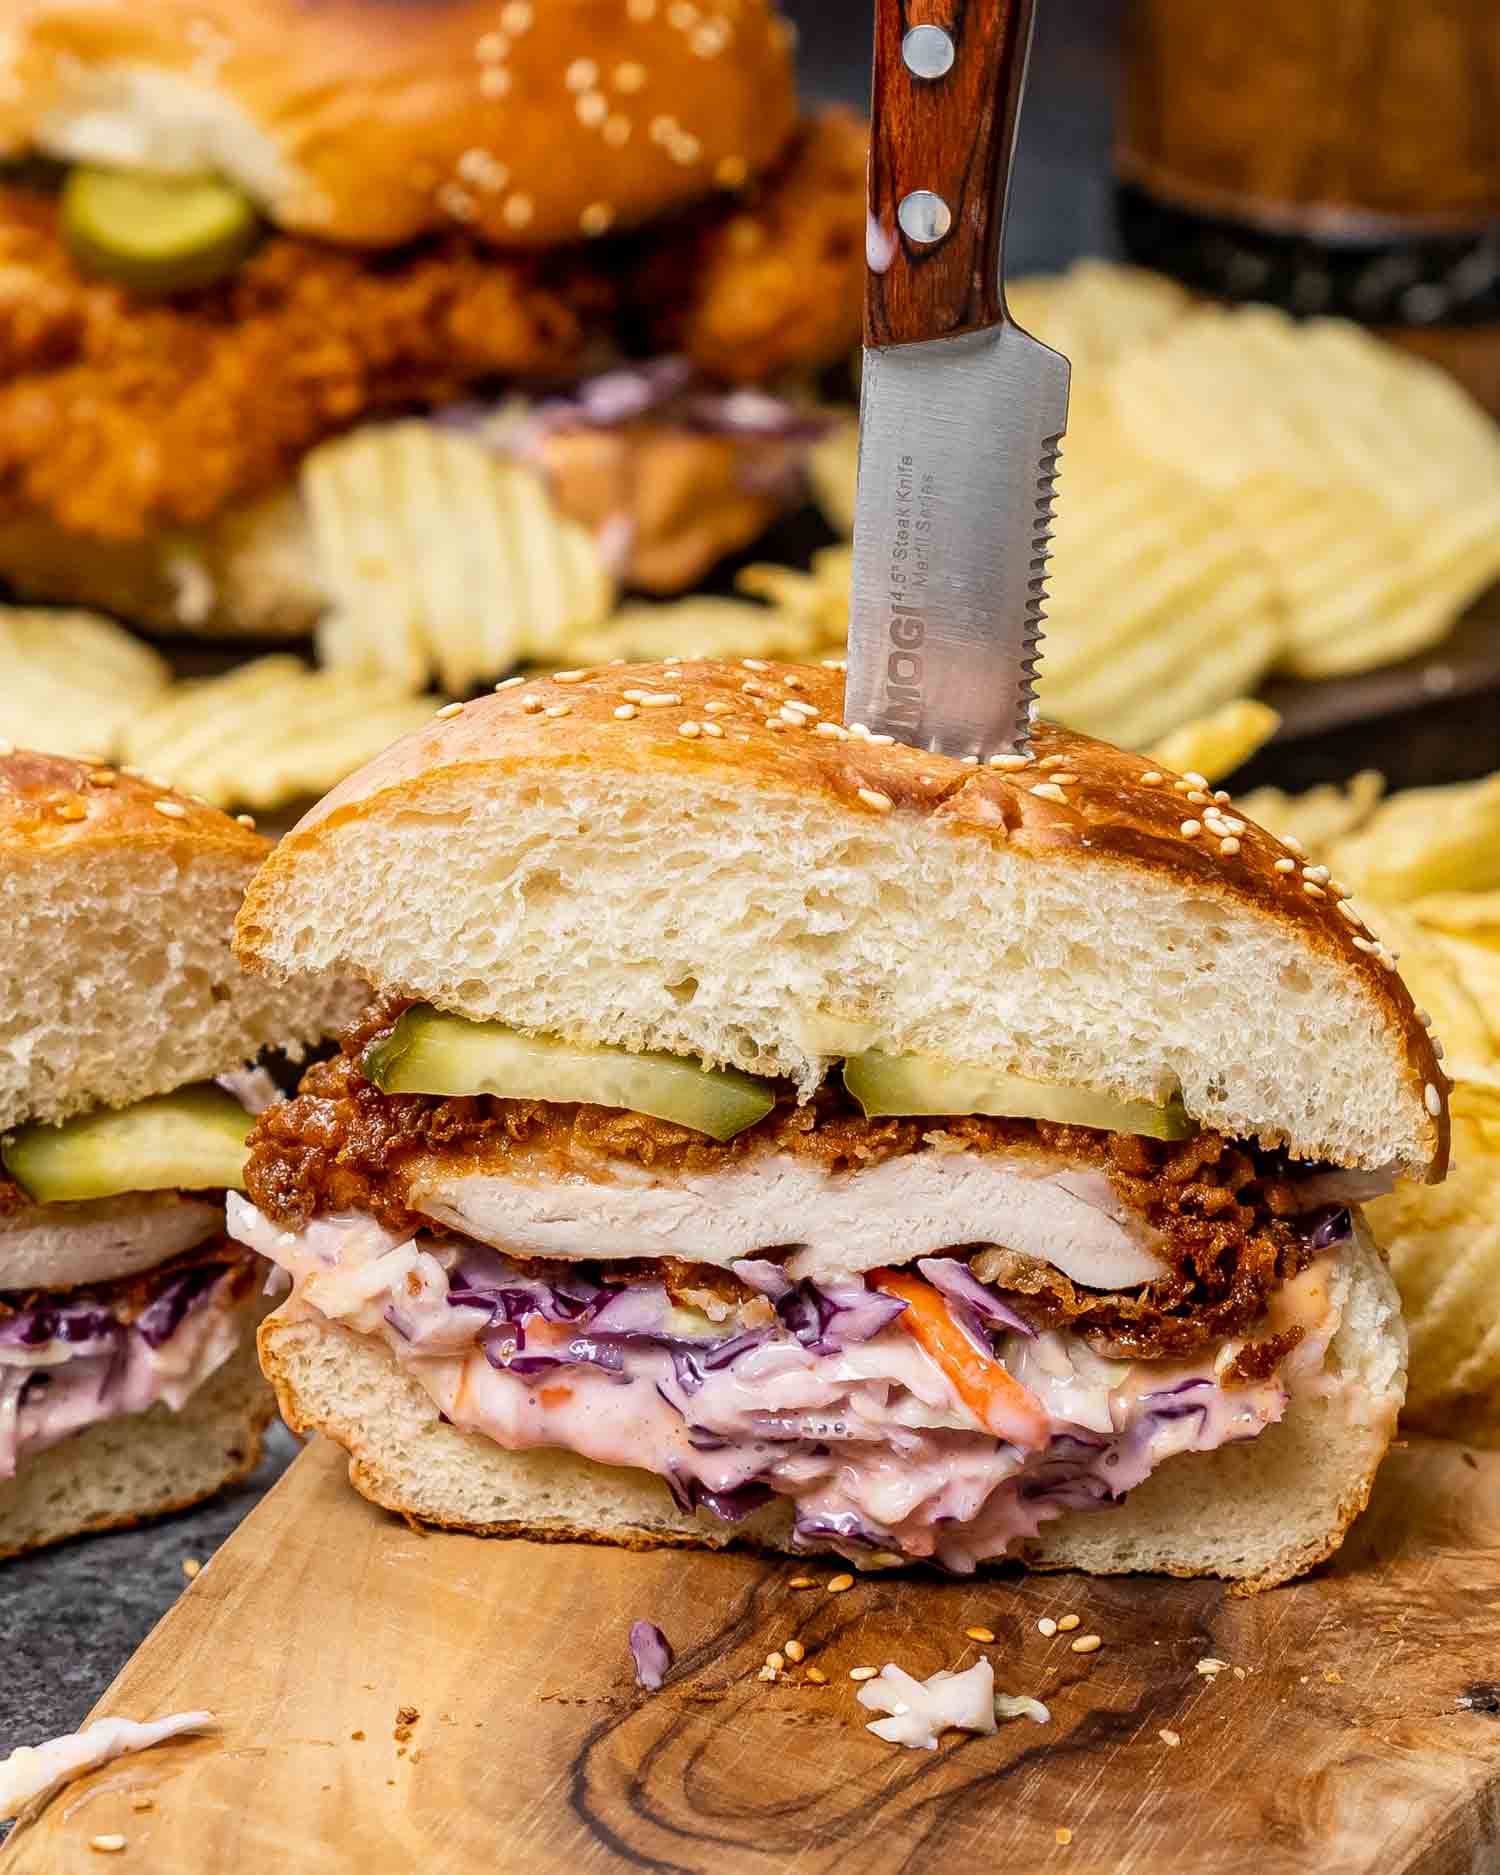 a crispy fried chicken sandwich cut in half with coleslaw on a cutting board with potato chips.